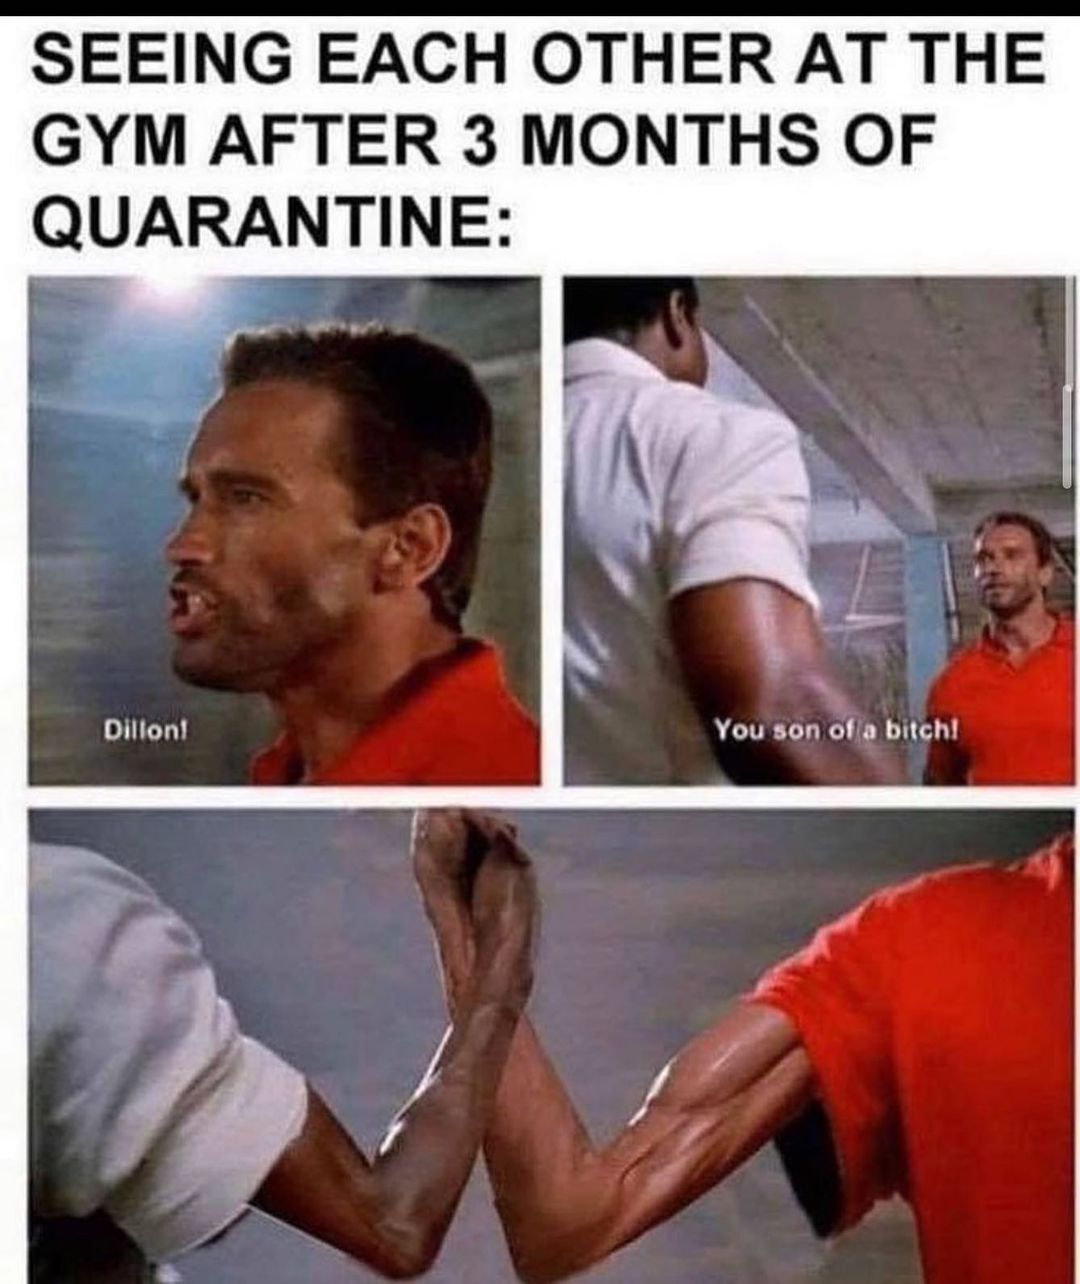 seeing each other at the gym after 3 months - Seeing Each Other At The Gym After 3 Months Of Quarantine Dillon! You son of a bitch!